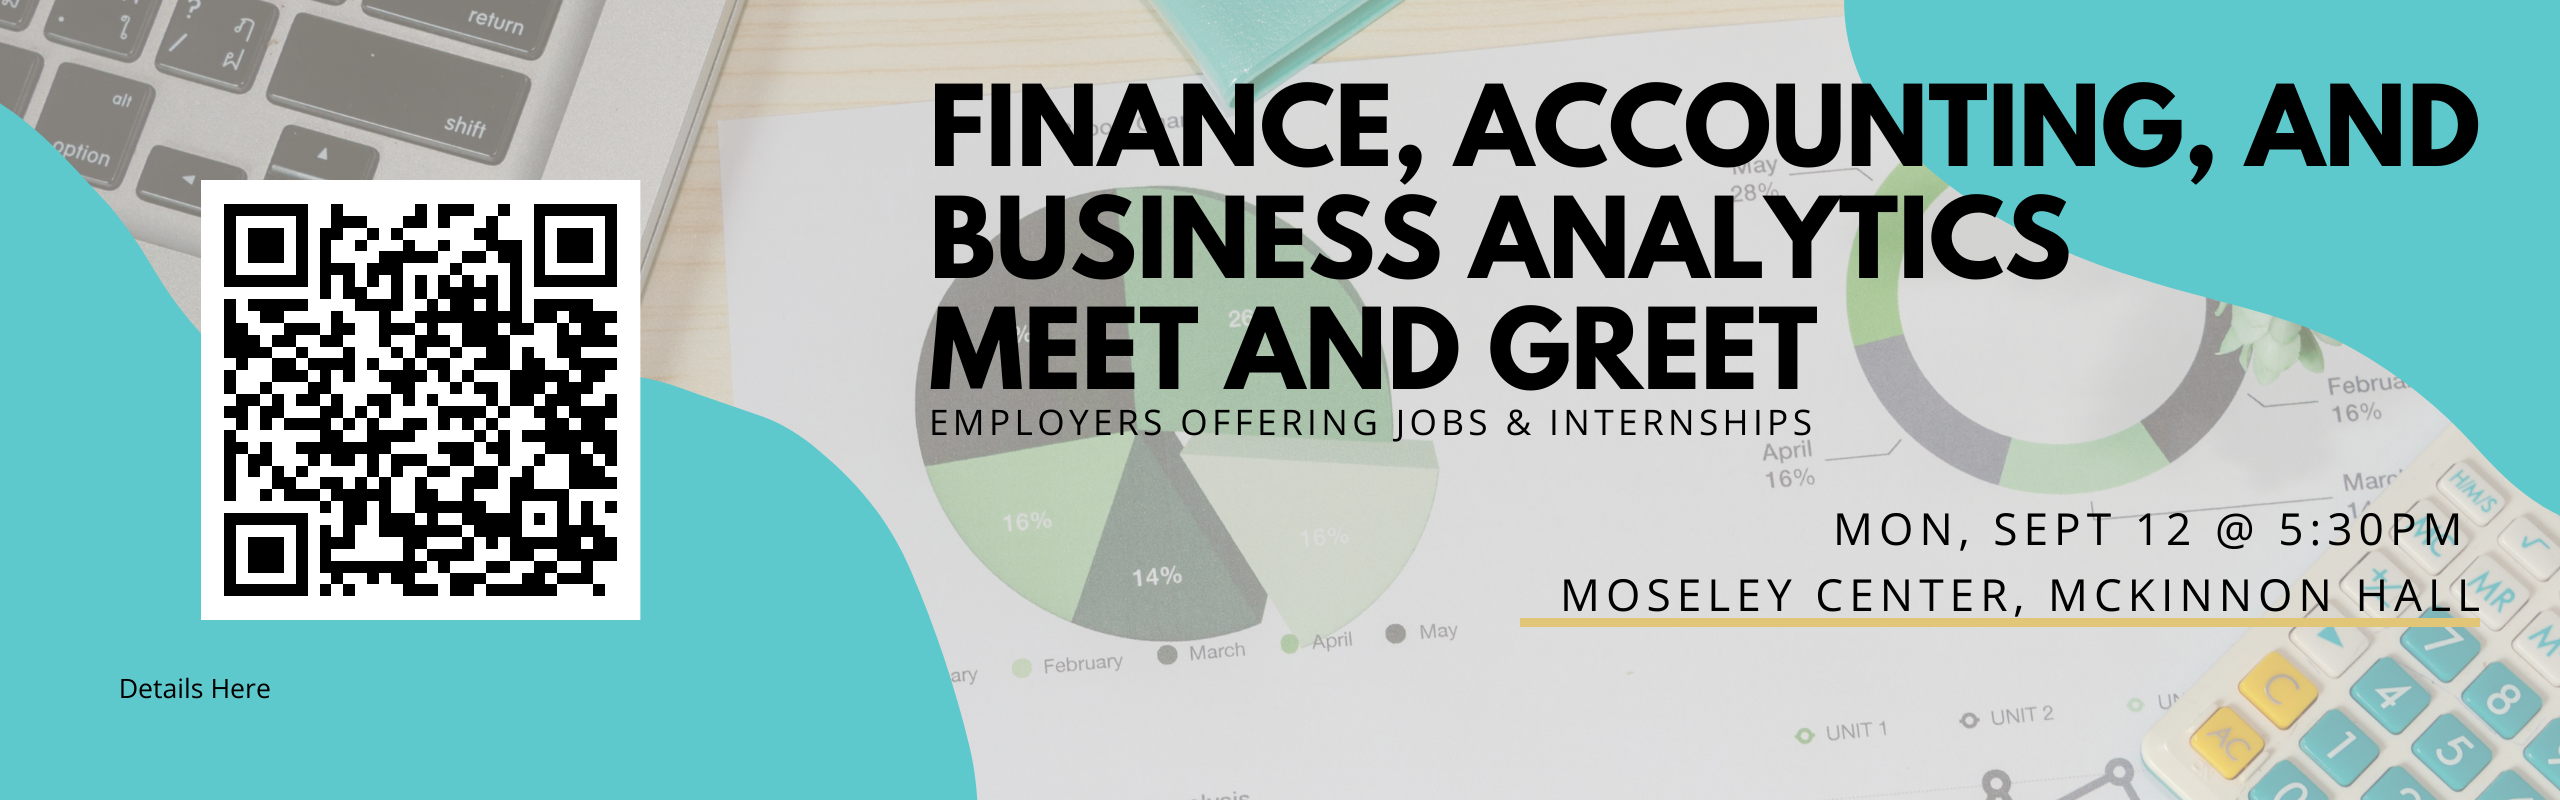 Finance and Accounting meet and greet September 12 Review the Elon Job Network for Details